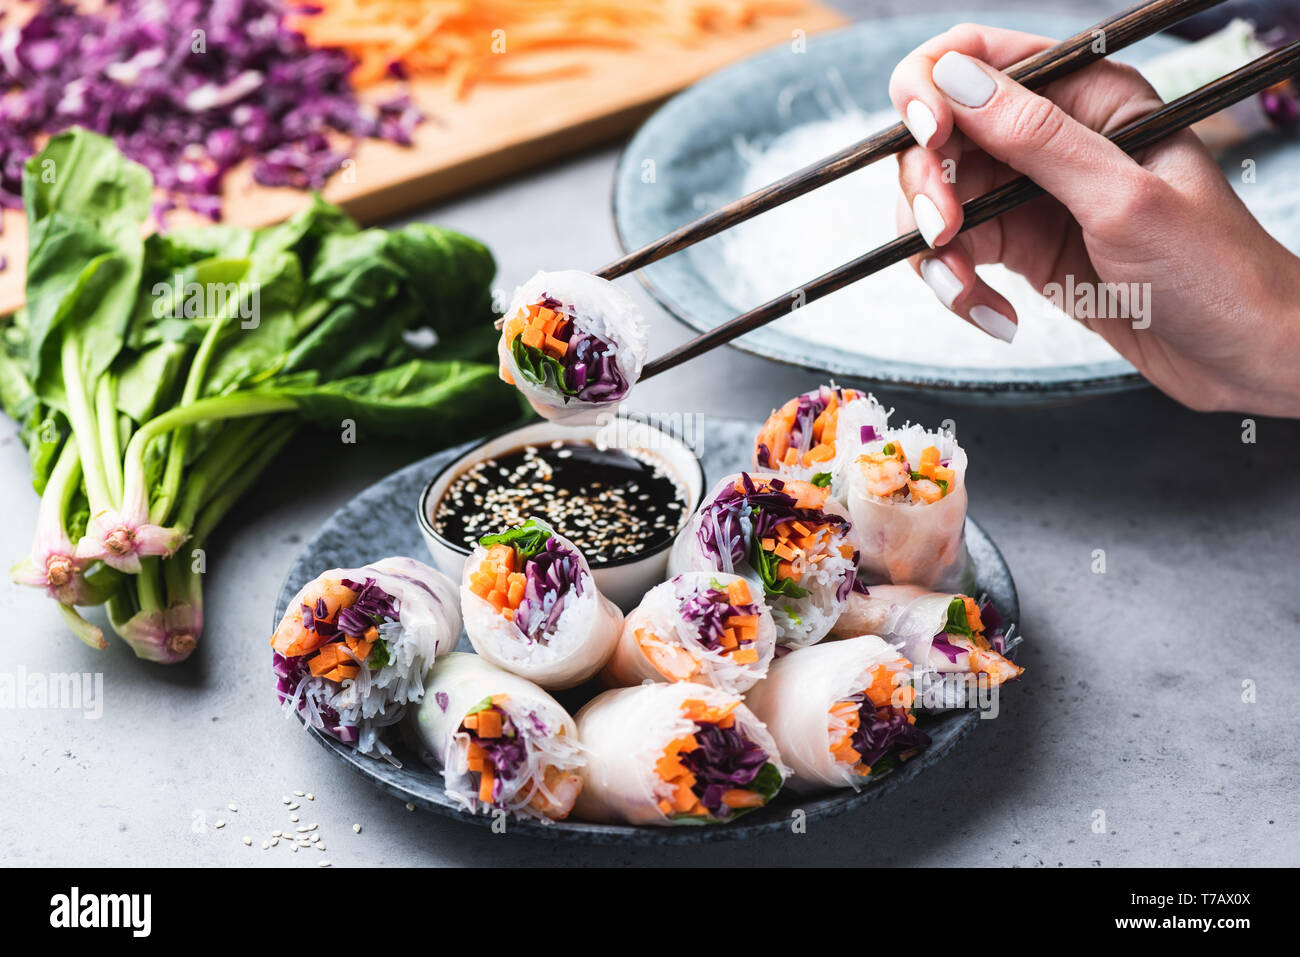 Eating Asian Cuisine Spring Rolls Or Rice Paper Rolls With Vegetables And Shrimps. Hand Holding Roll With Chopsticks Stock Photo